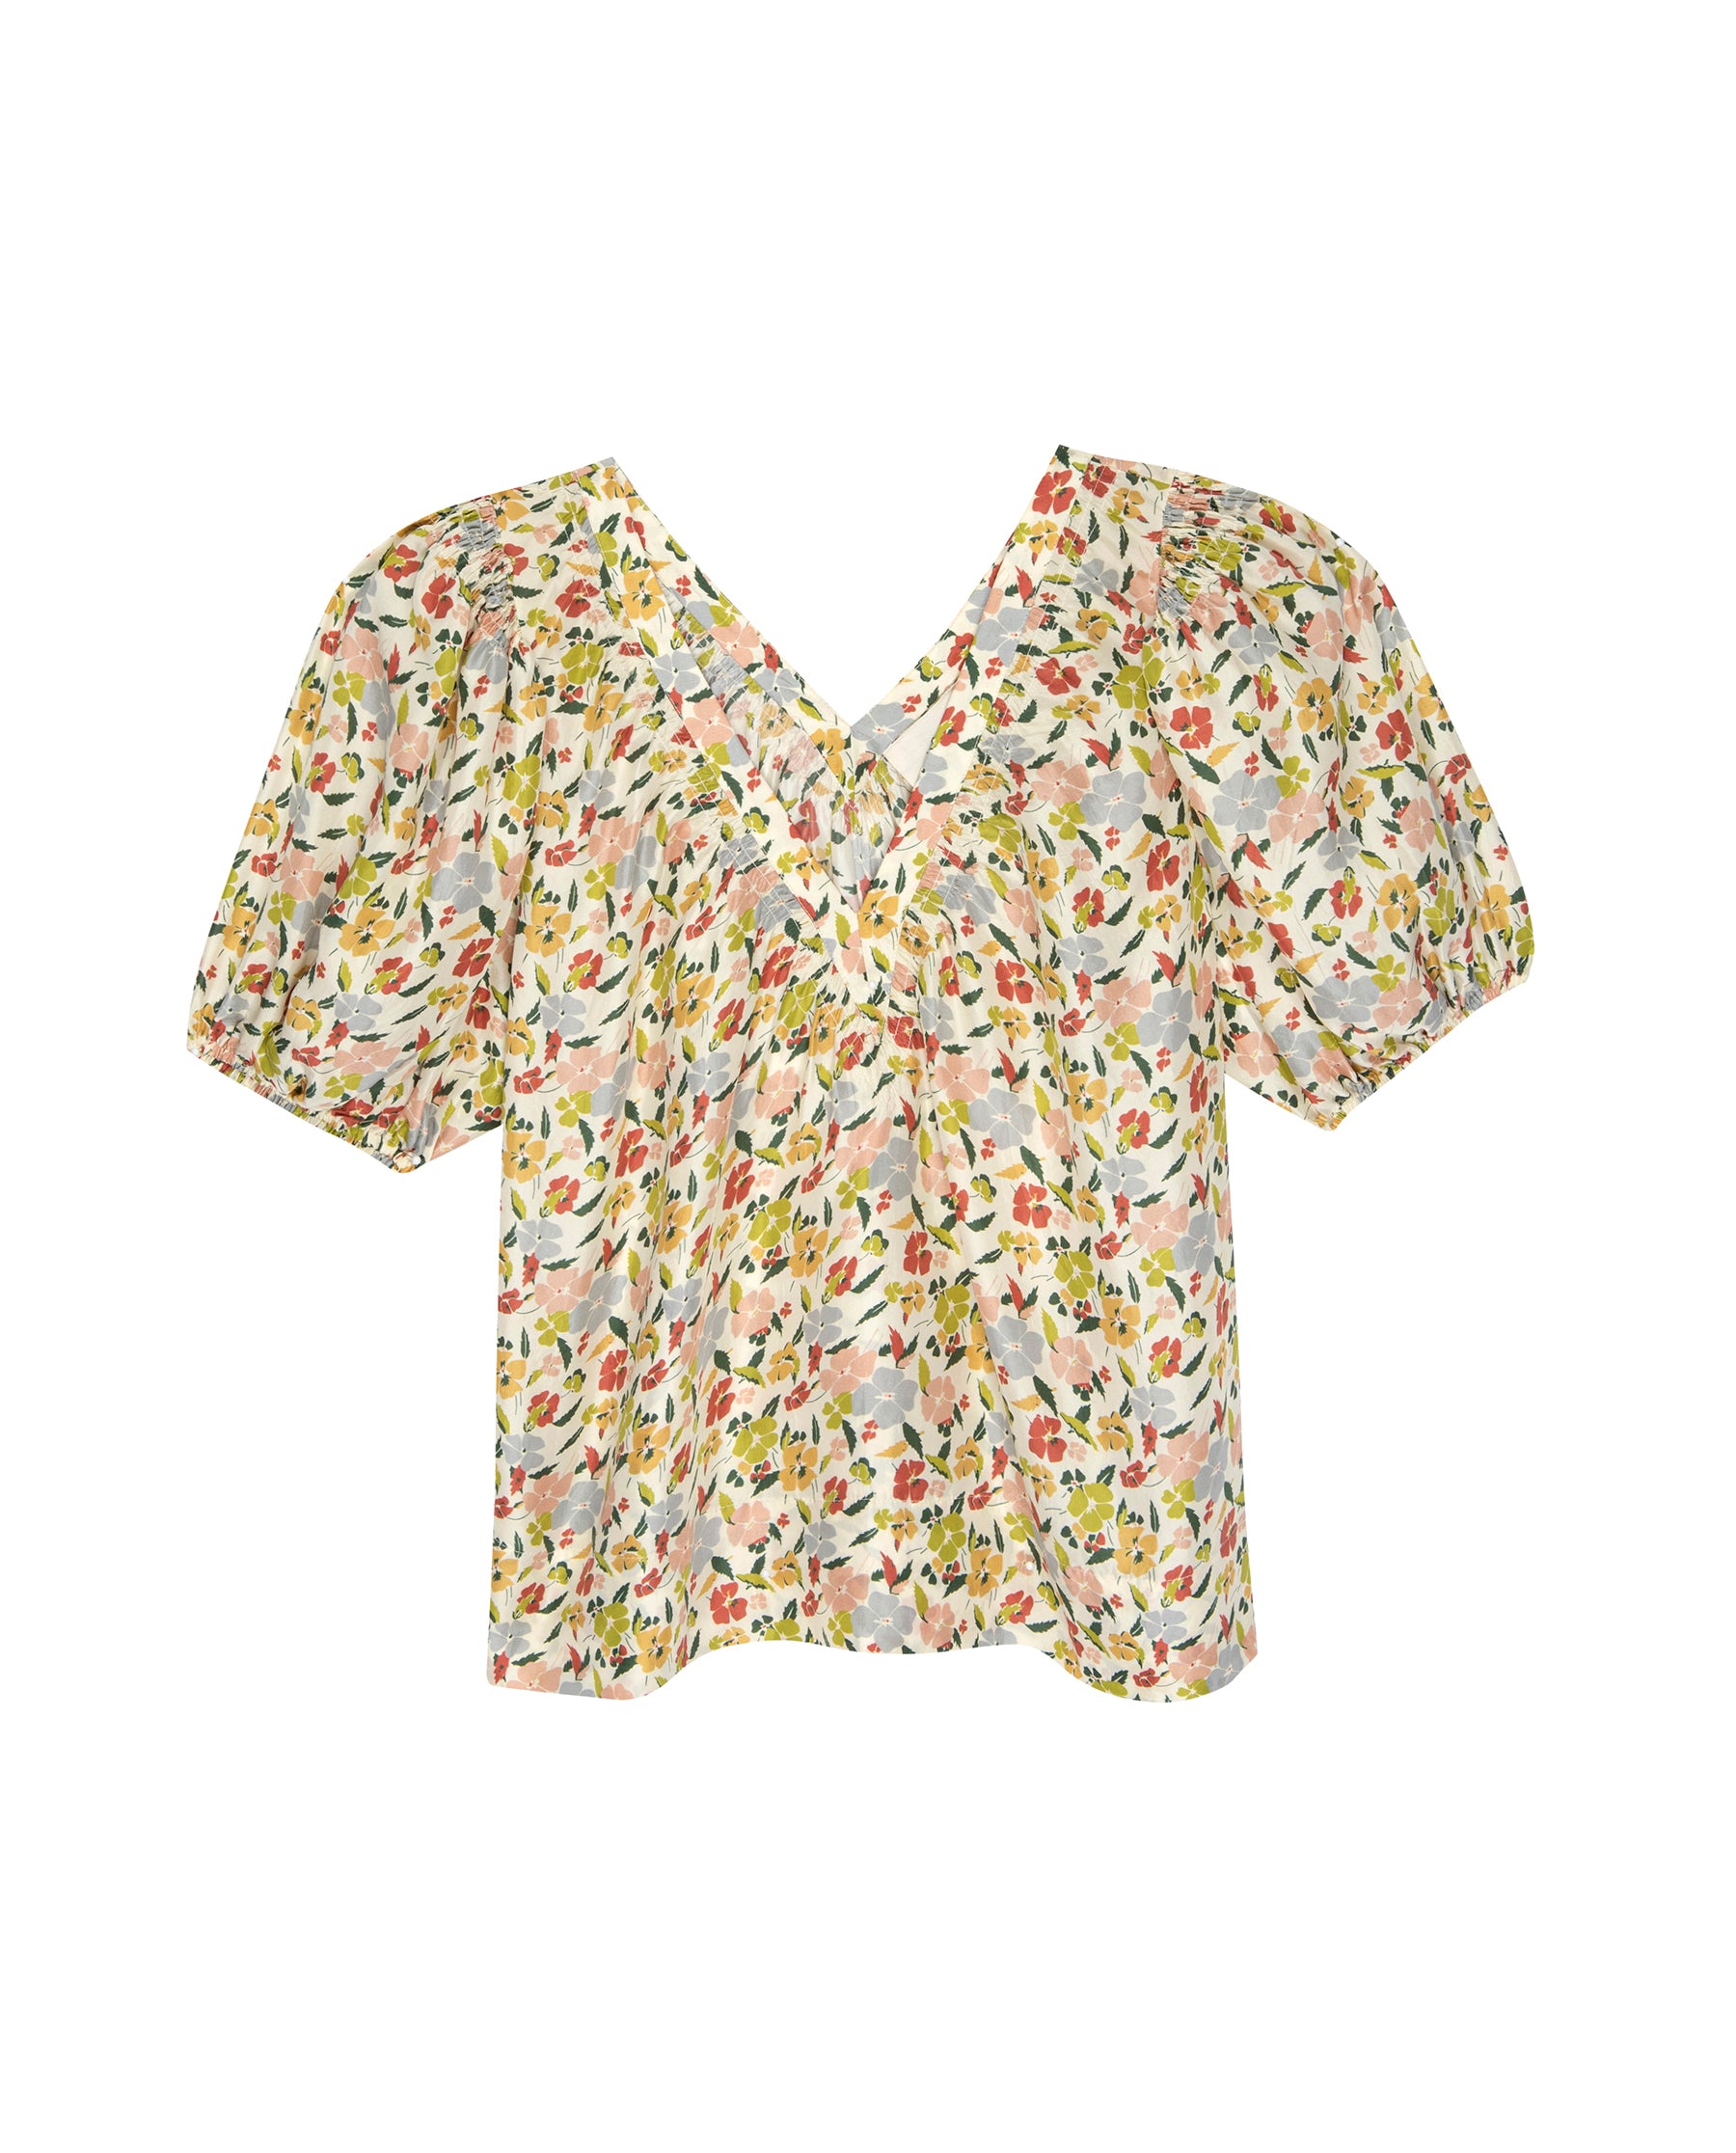 The Bungalow Top. -- Floating Petals Floral